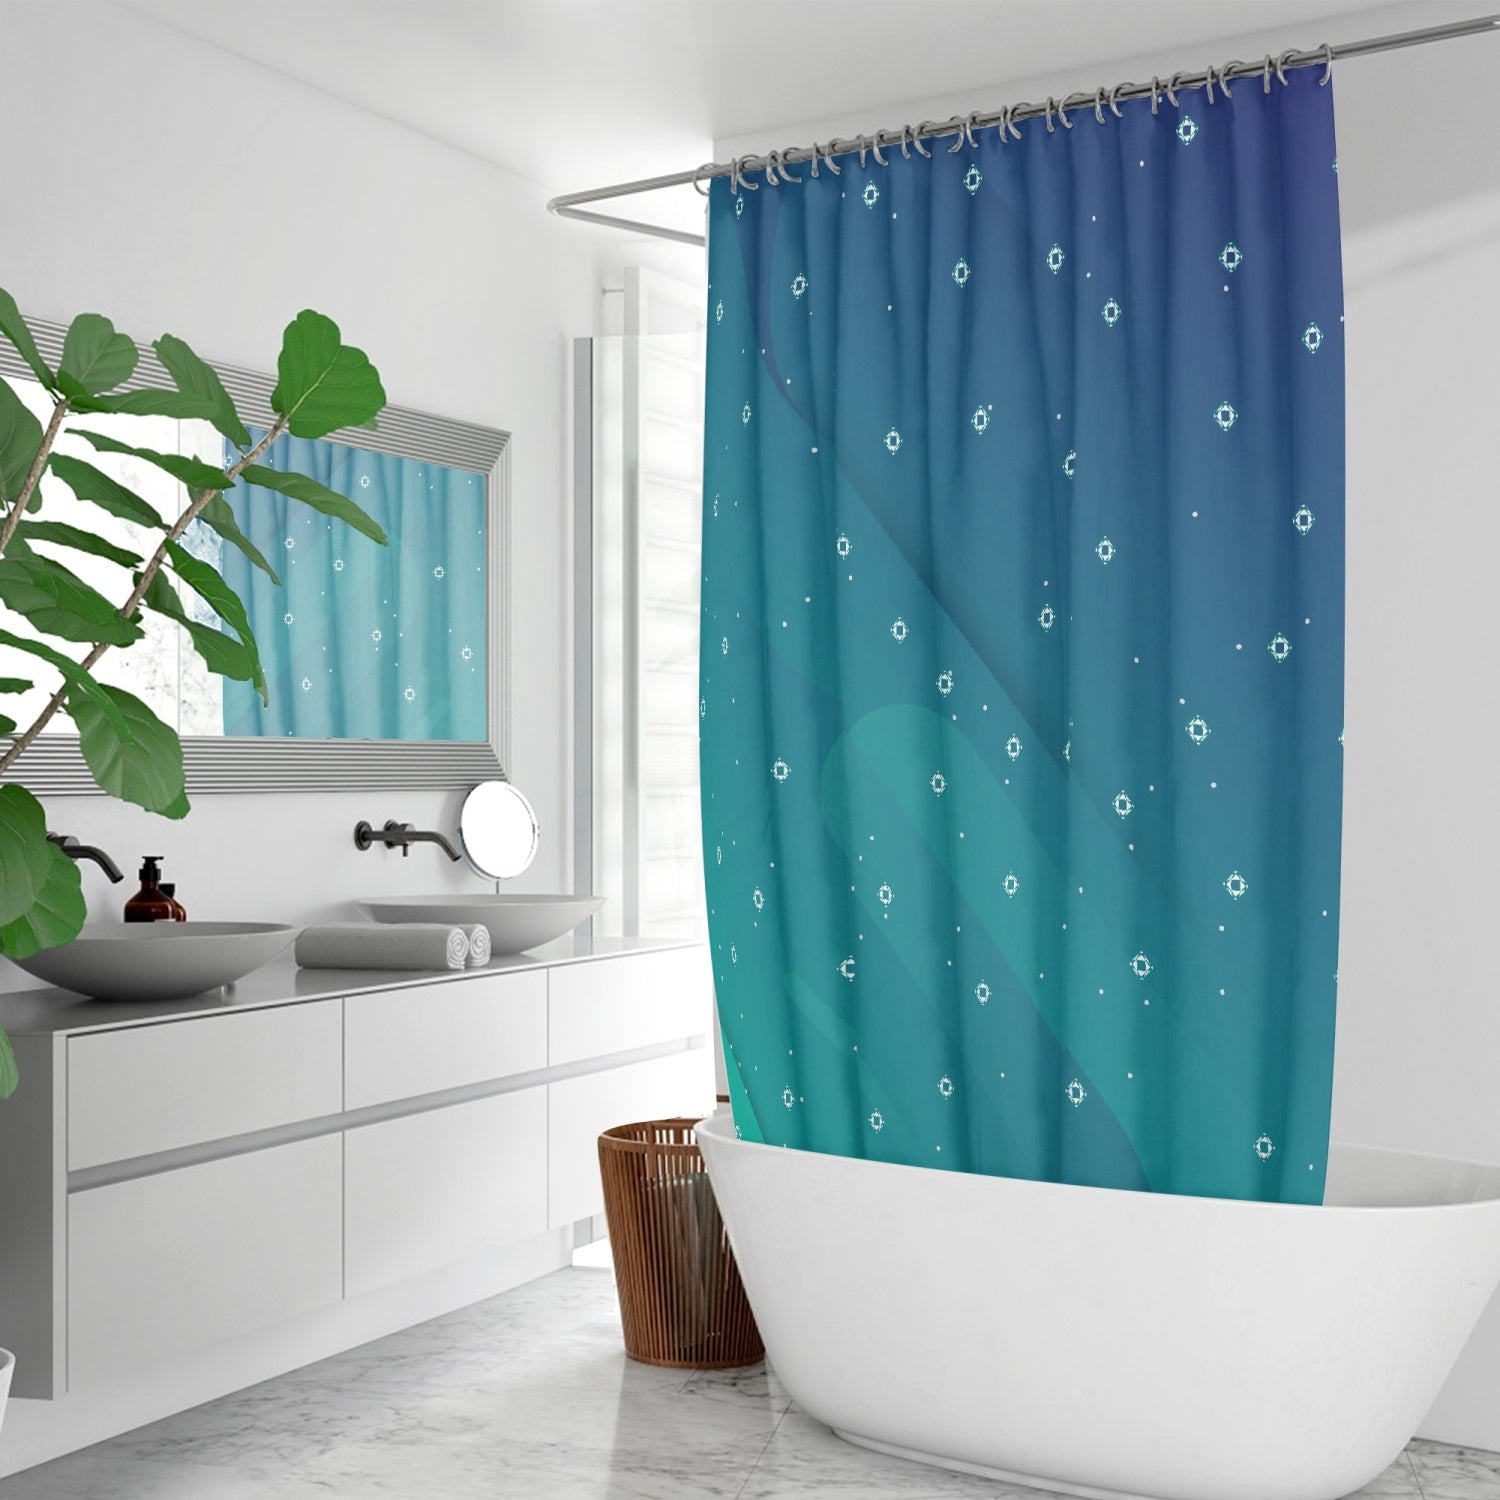 171. Quick-drying Shower Curtain ONVELS